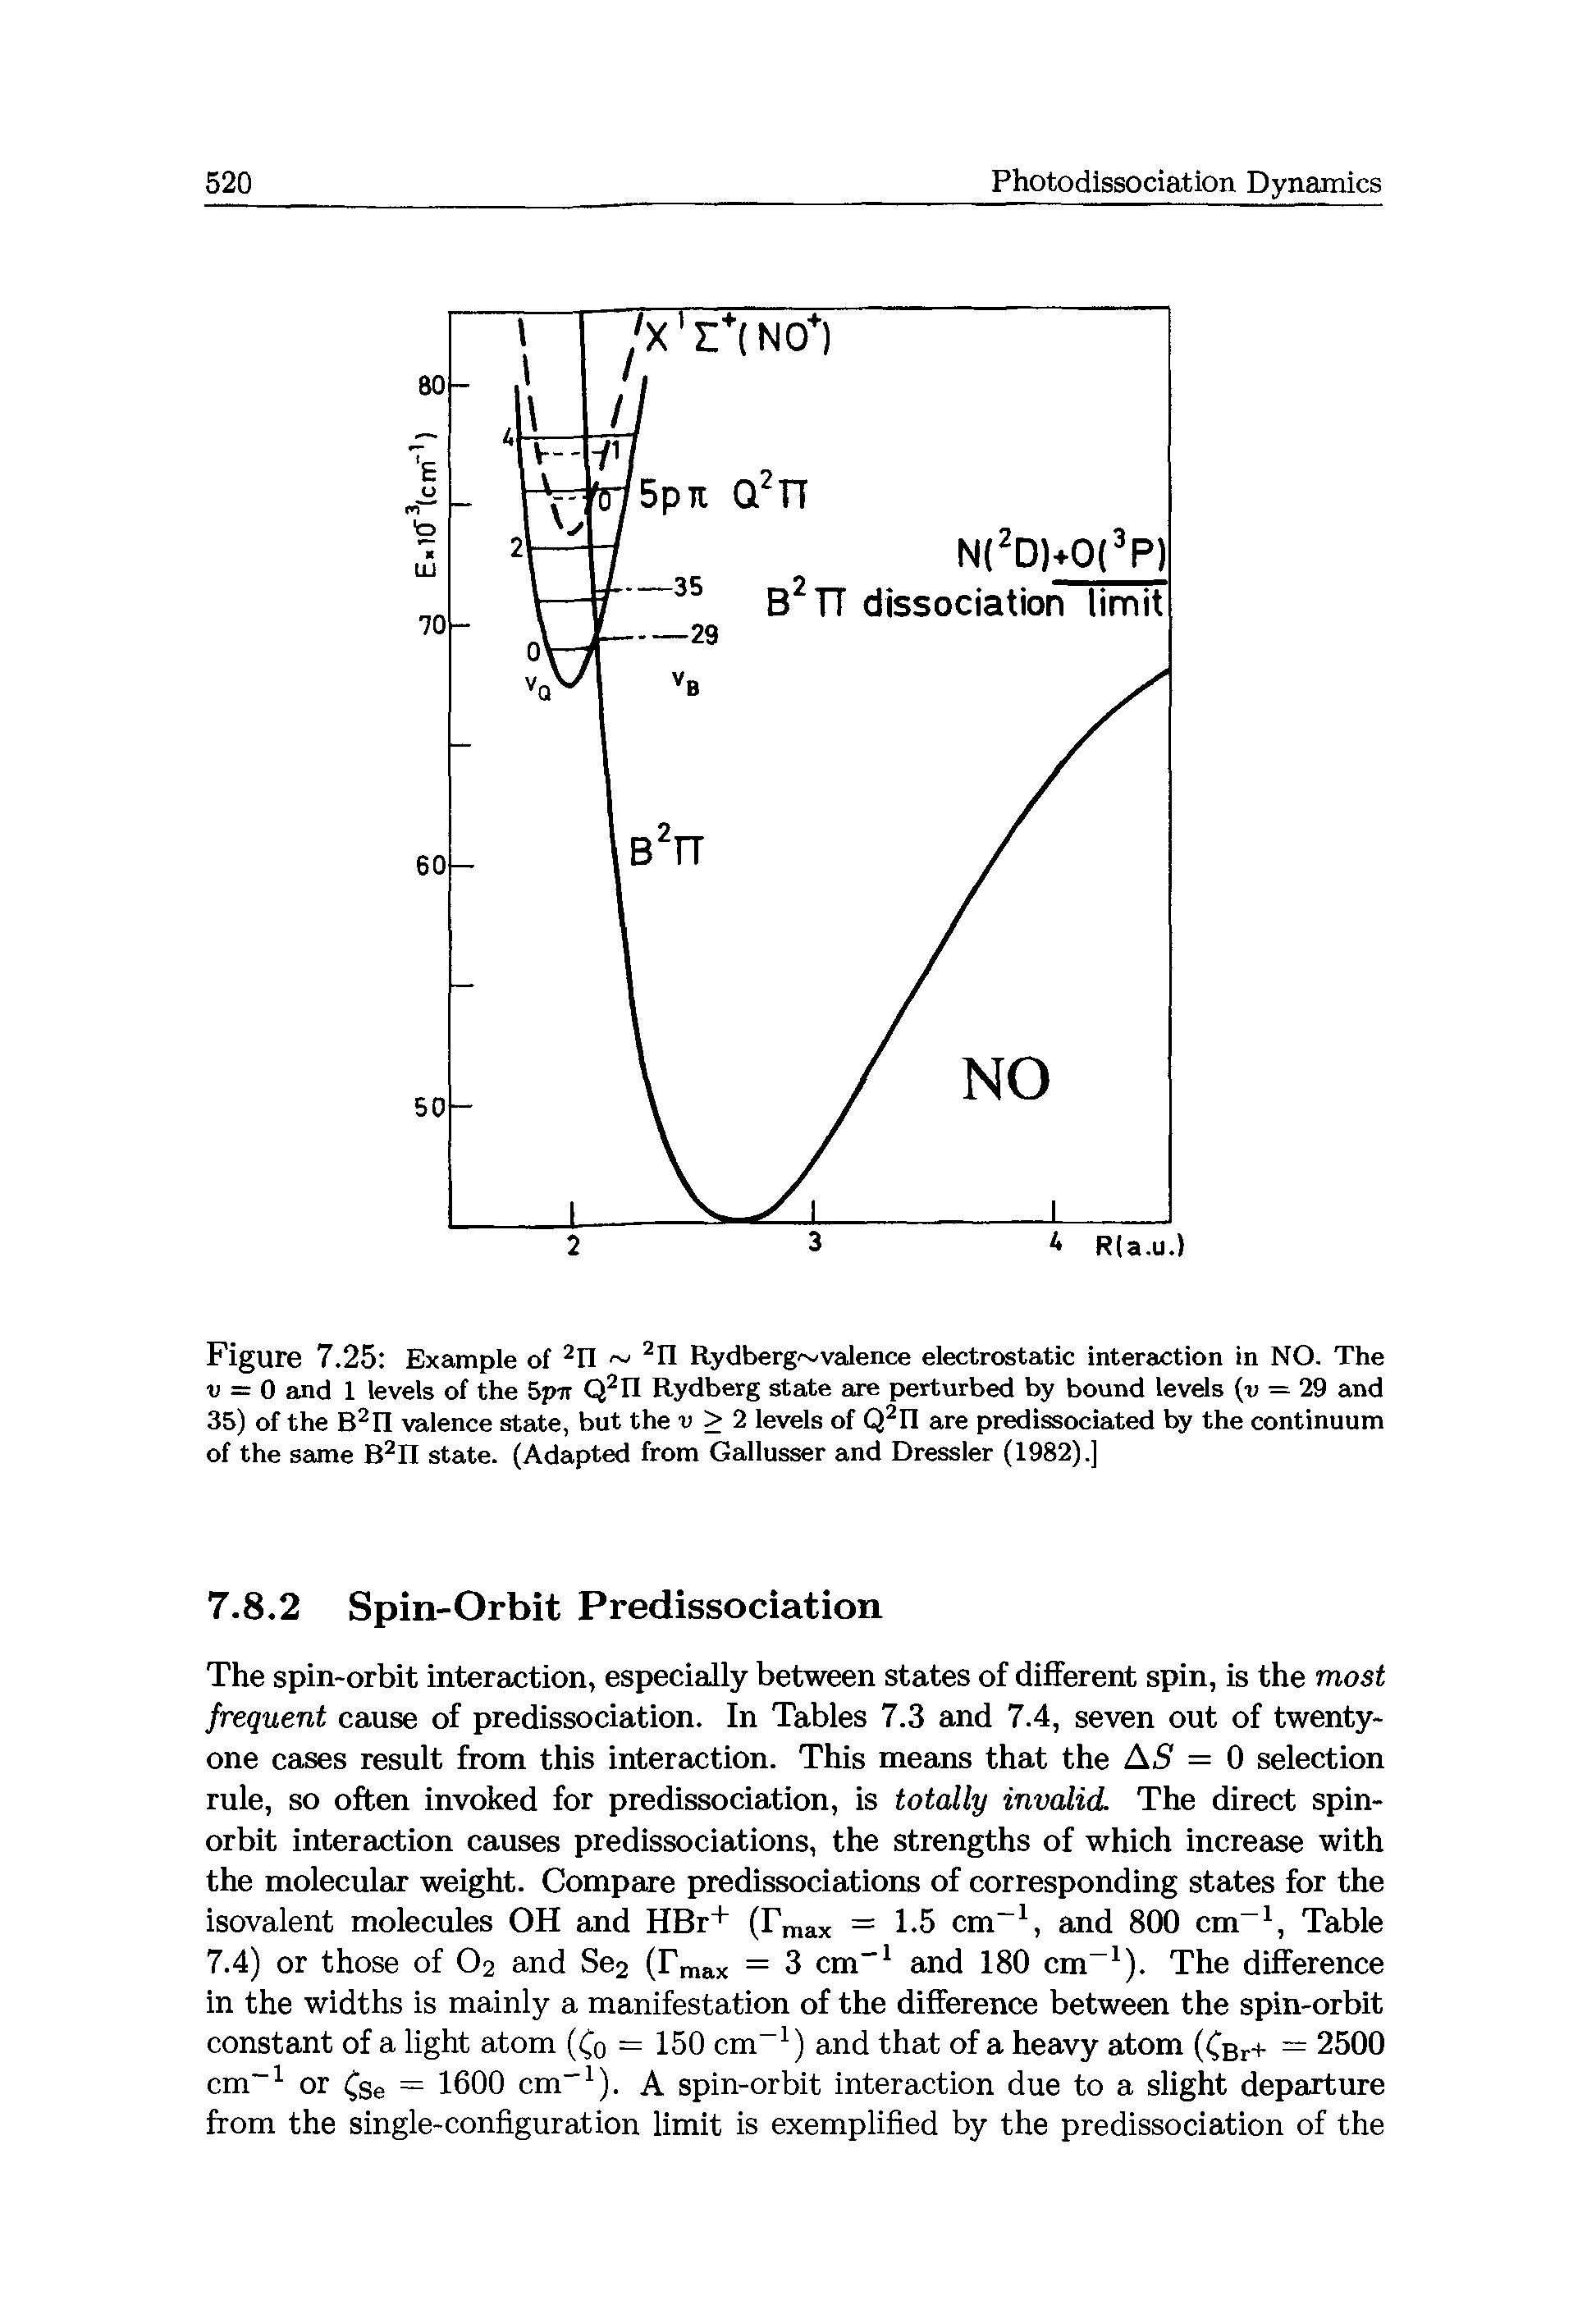 Figure 7.25 Example of 2n 2n Rydberg vaJence electrostatic interaction in NO. The v = 0 and 1 levels of the 5pir Q2I1 Rydberg state are perturbed by bound levels (u = 29 and 35) of the B2n valence state, but the v > 2 levels of Q2n are predissociated by the continuum of the same B2II state. (Adapted from Gallusser and Dressier (1982).]...